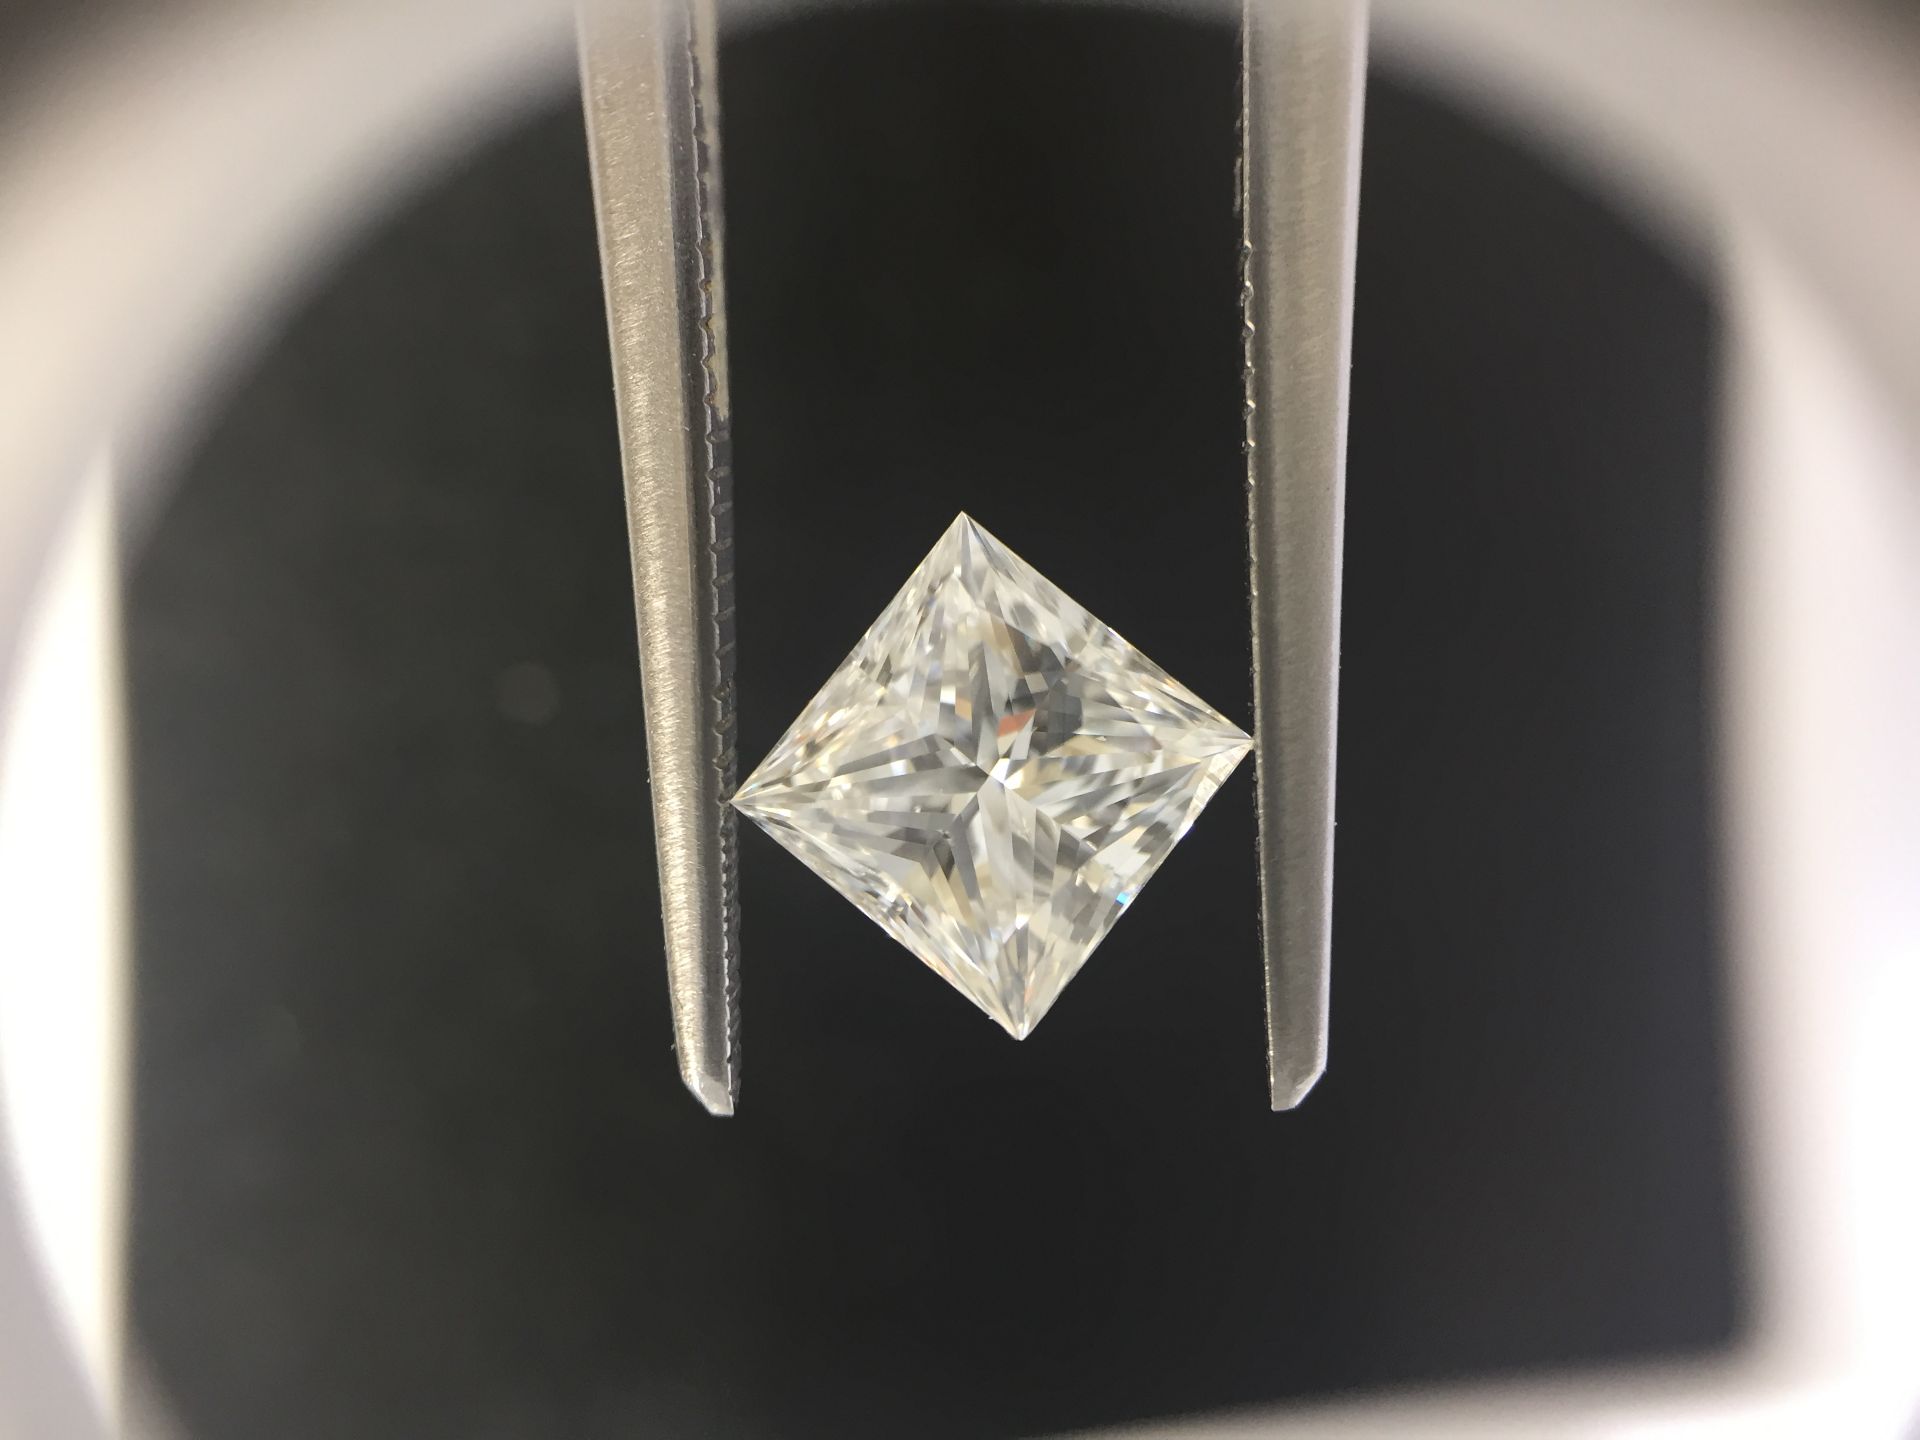 0.96ct princess cut diamond. F colour, SI1 clarity. No certification. Can be used for ring or